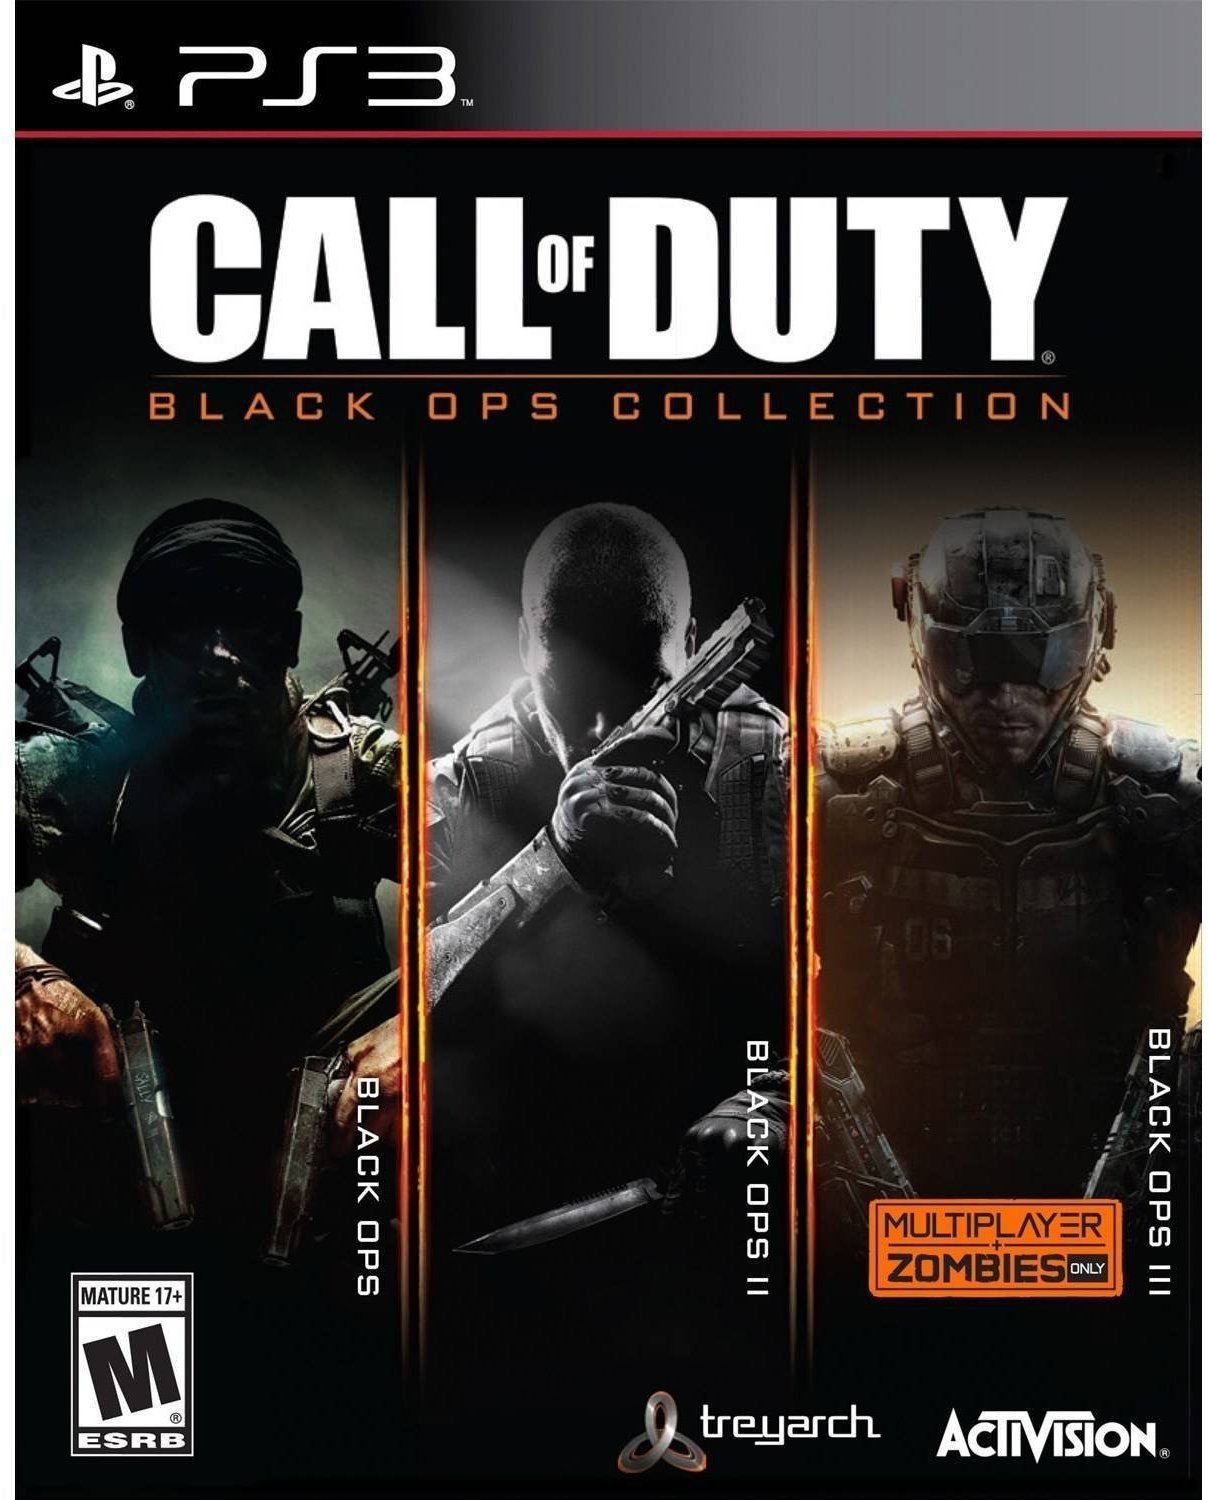 Black Ops Collection